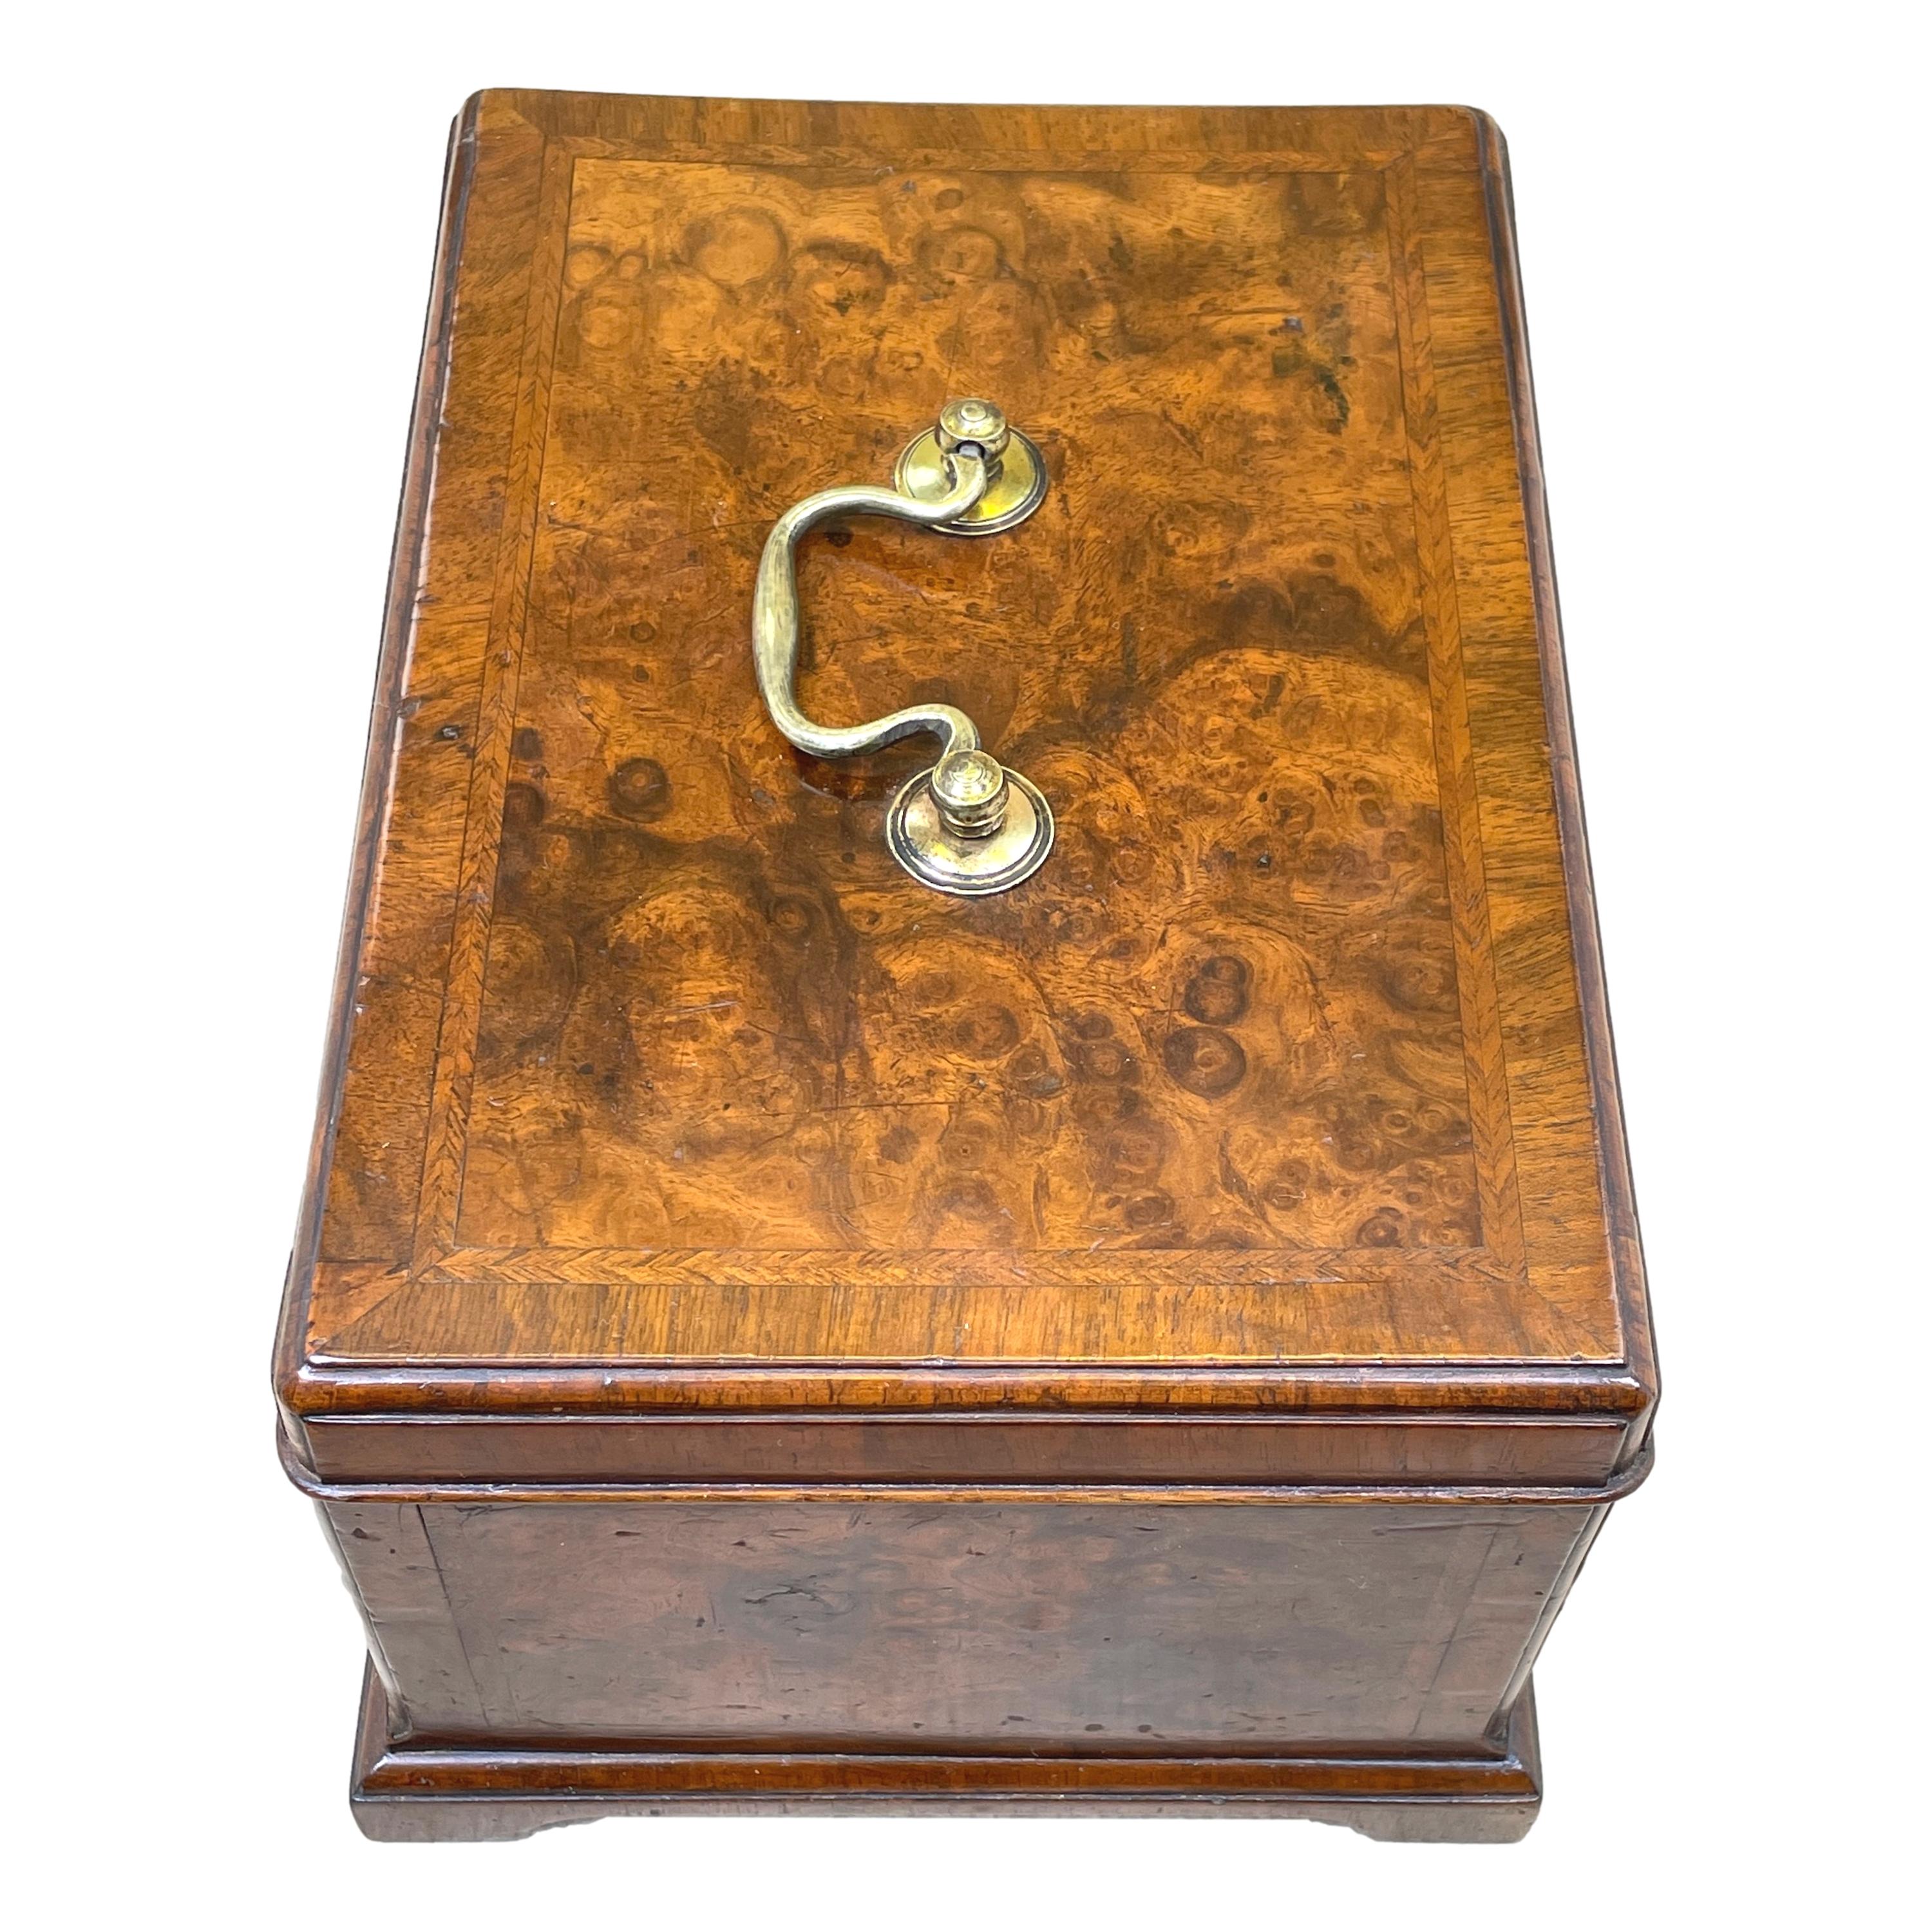 A very fine George II period 18th century burr walnut tea caddy having superbly figured top with original brass swan neck handle enclosing divided interior, with cross banded and herringbone inlay decoration throughout, canted corners and original